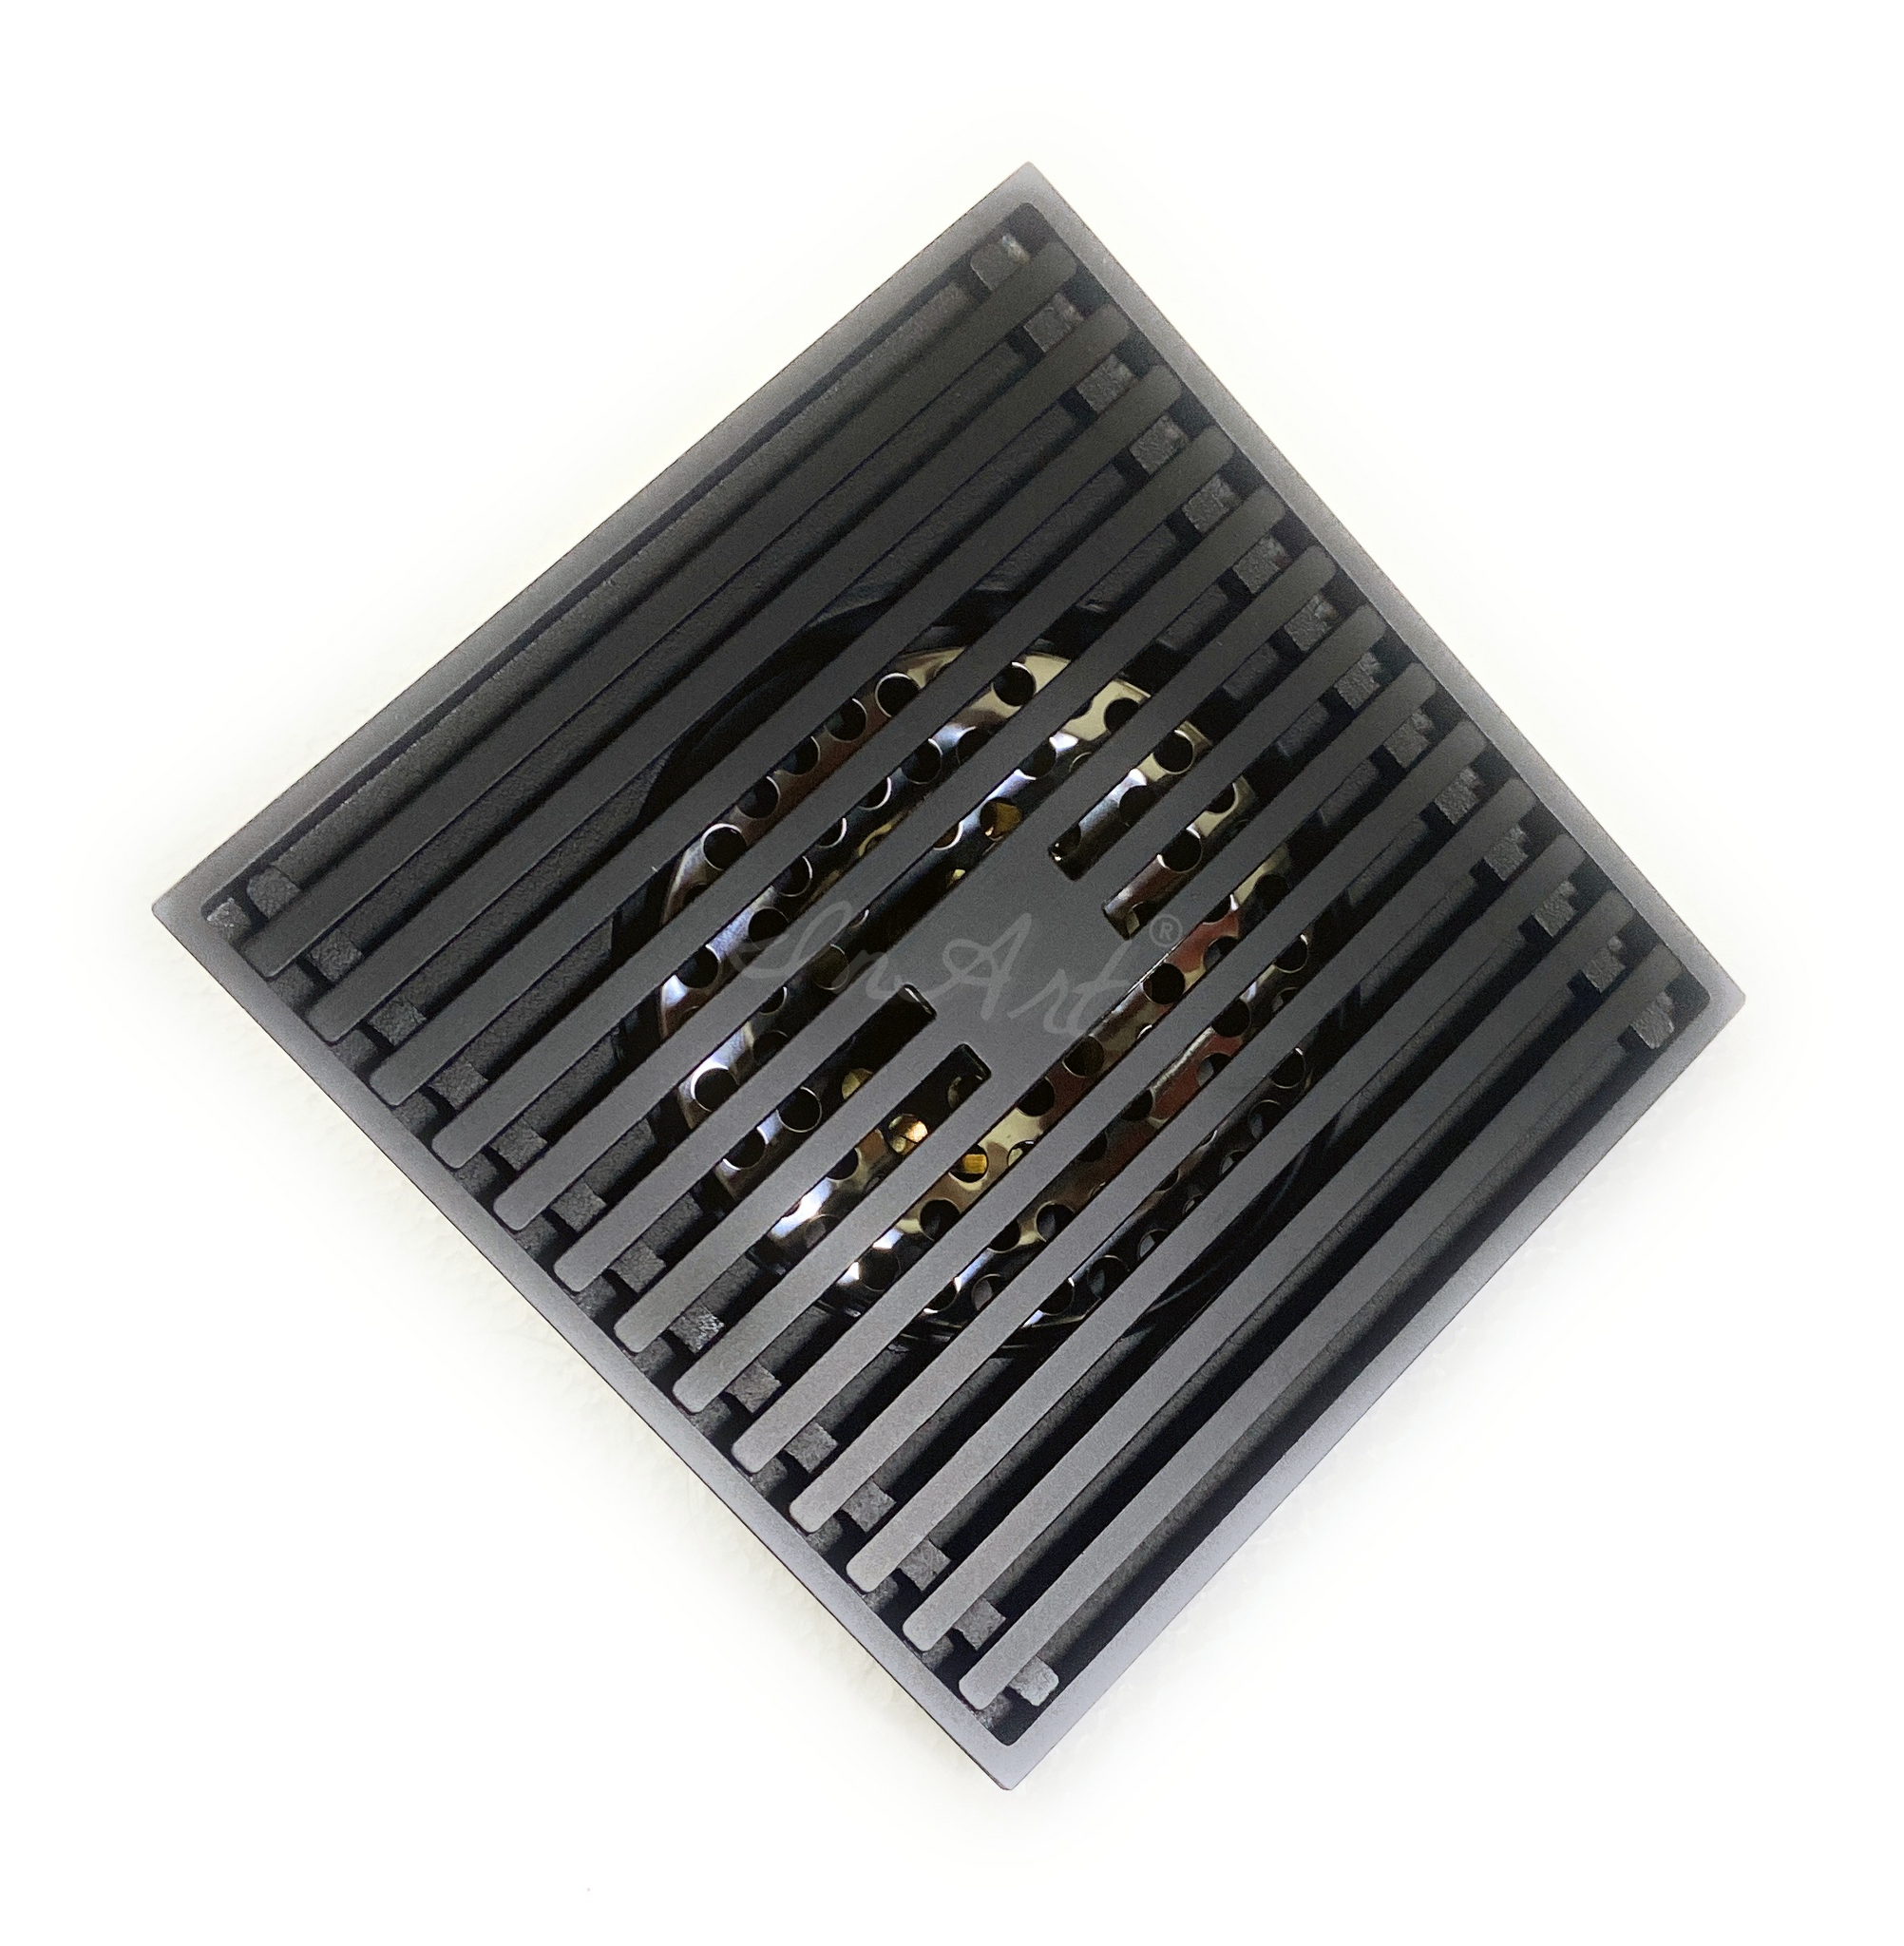 InArt Brass Square Shower Floor Drain with Removable Cover Grid Grate